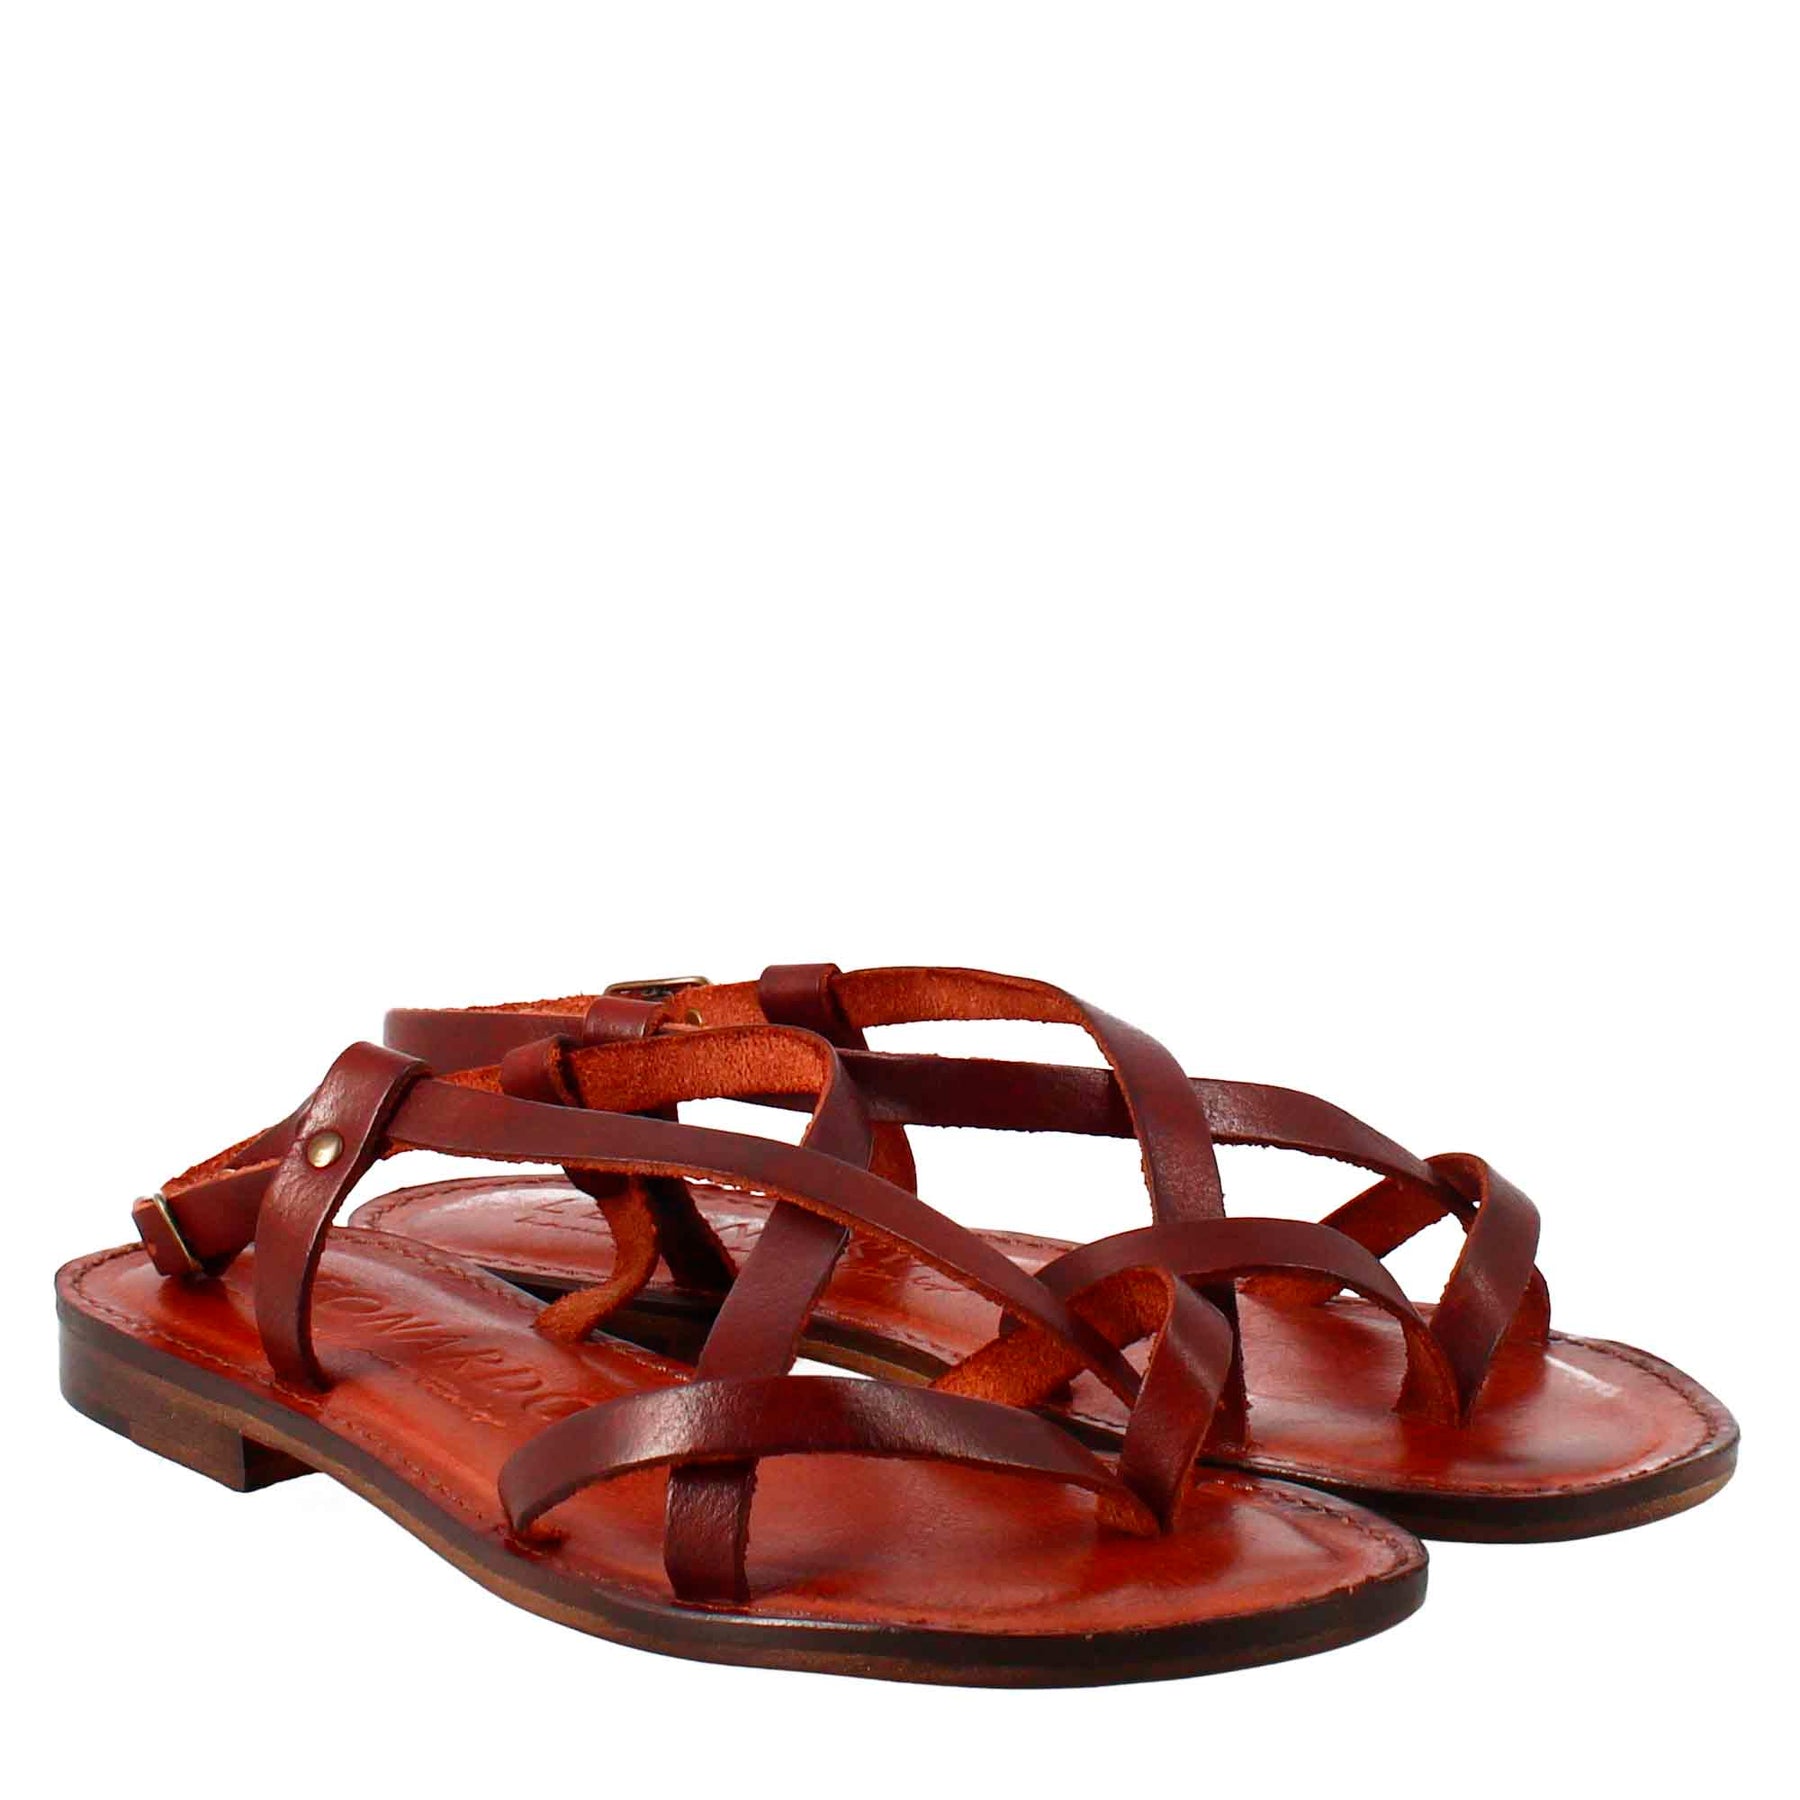 Solace sandals for women Ancient Roman style in brown leather